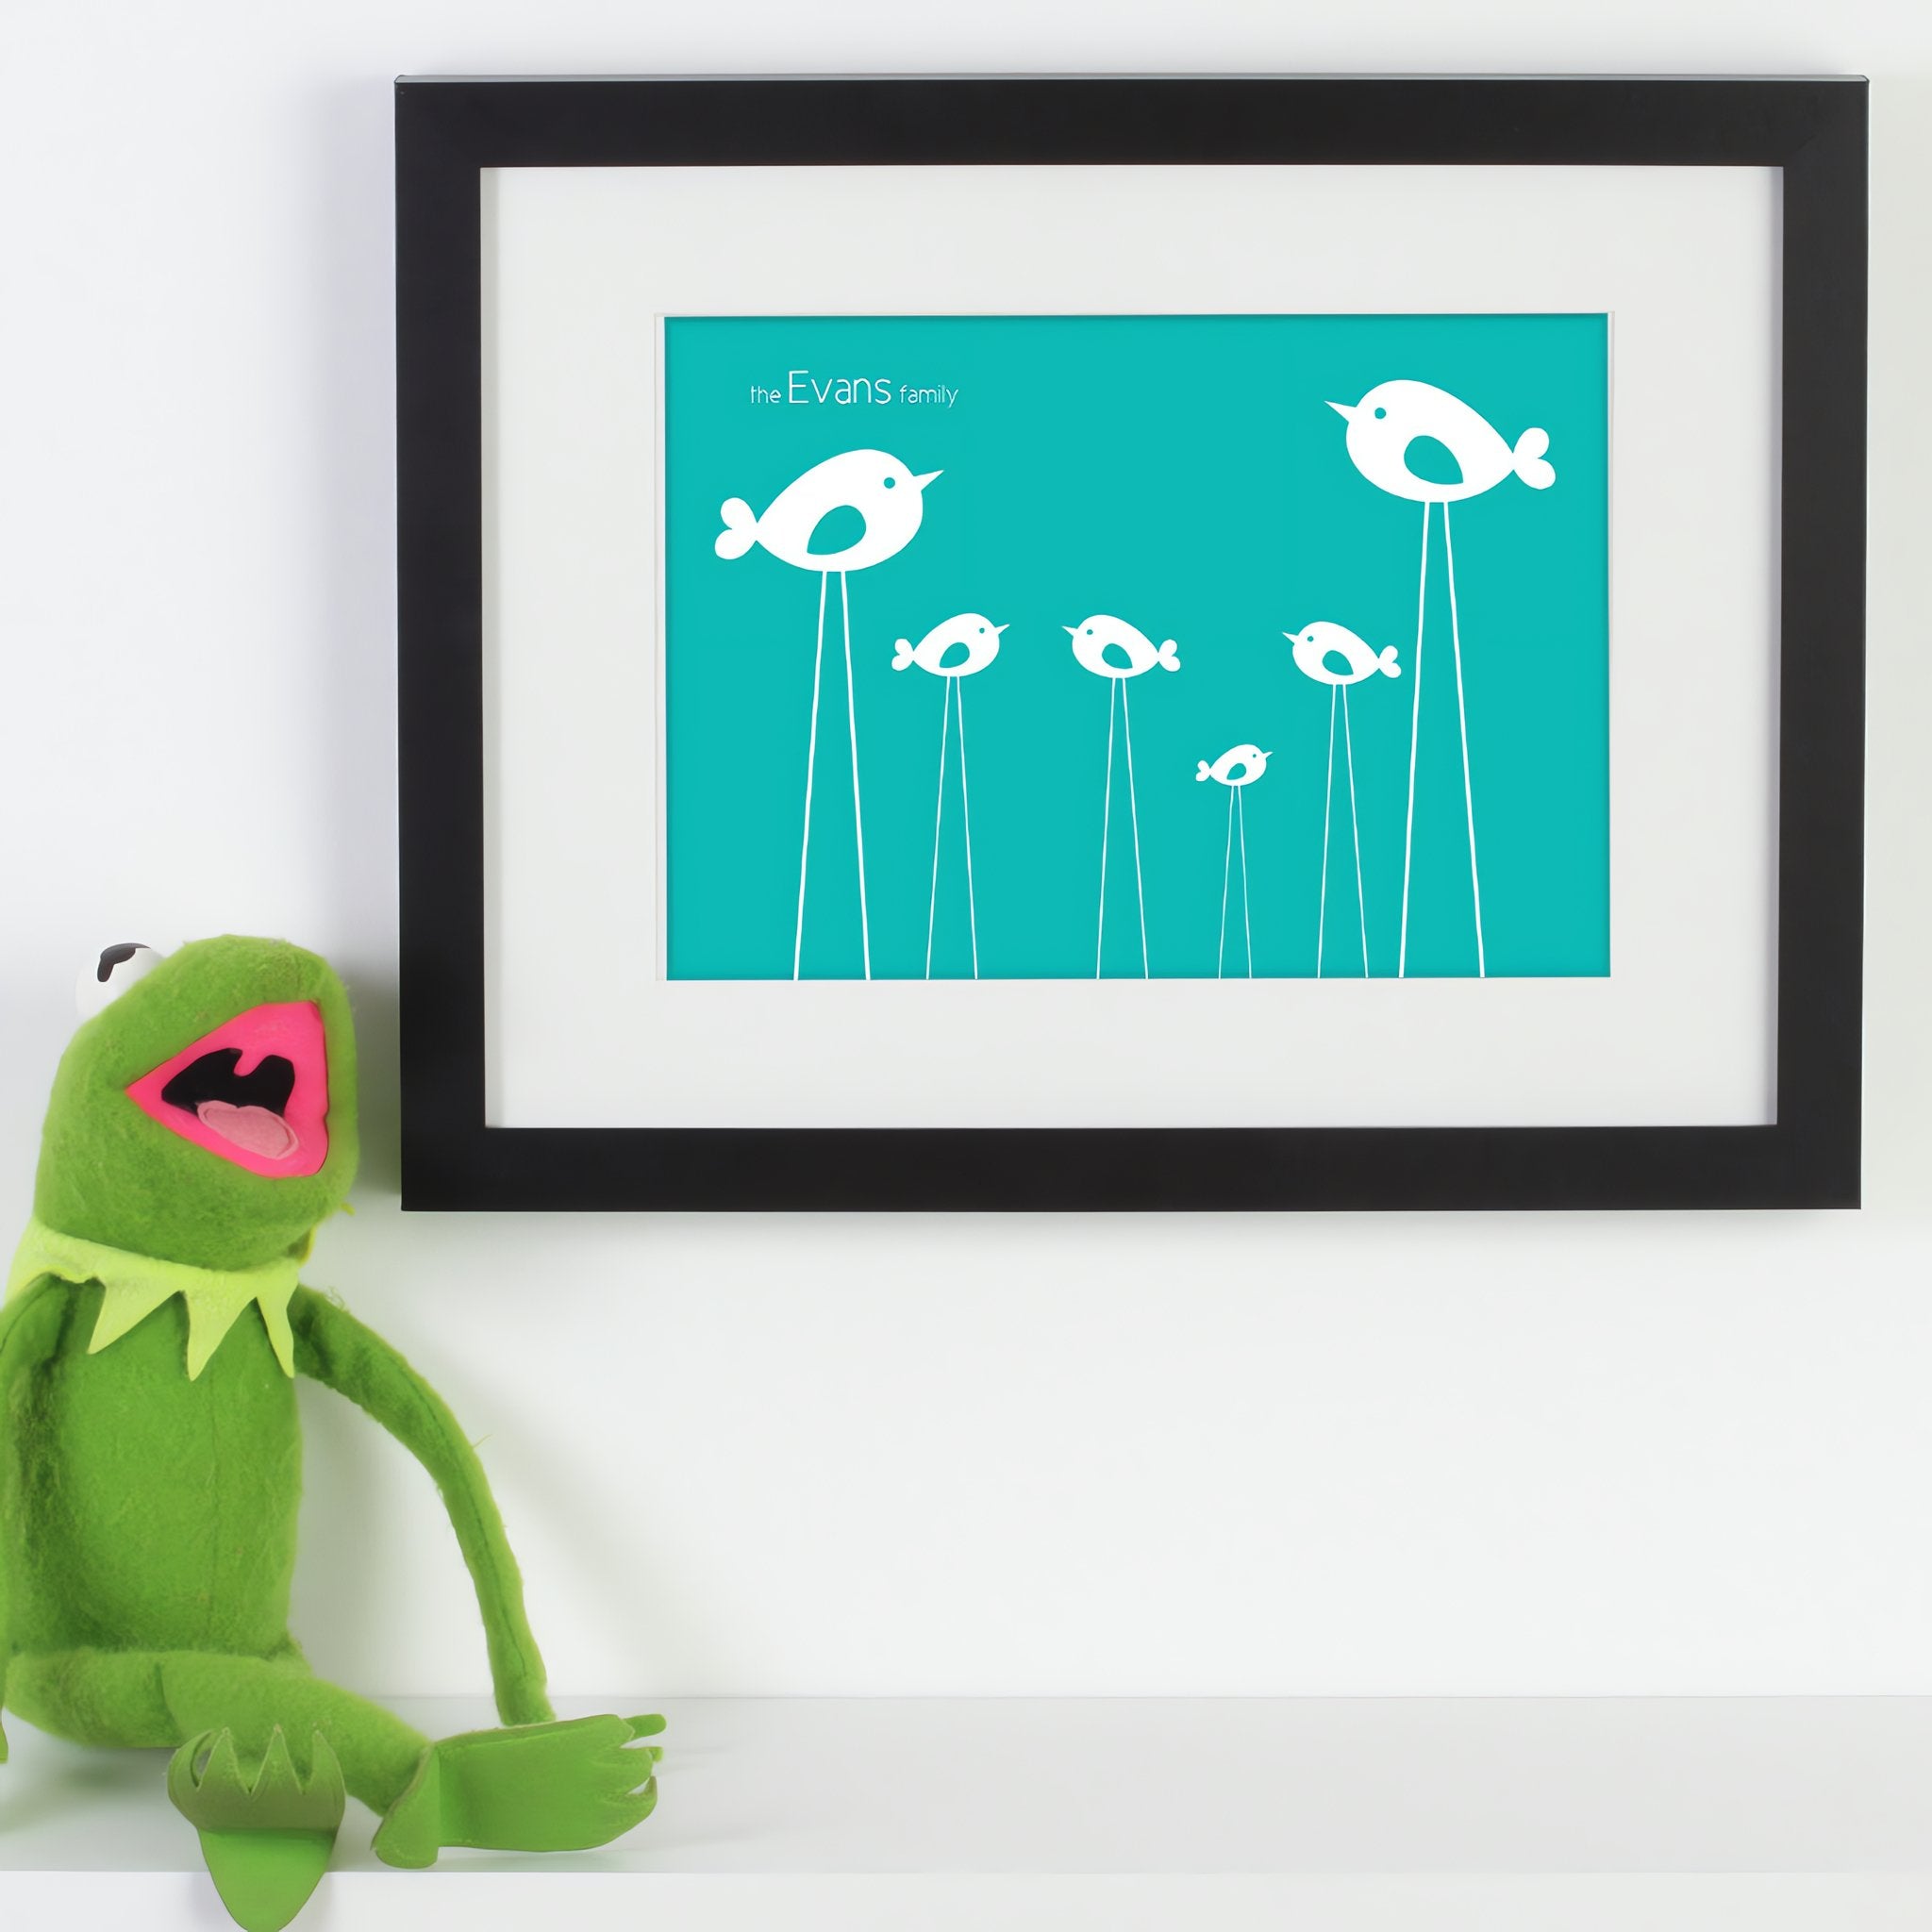 Personalised framed print with birds next to kermit the frog.